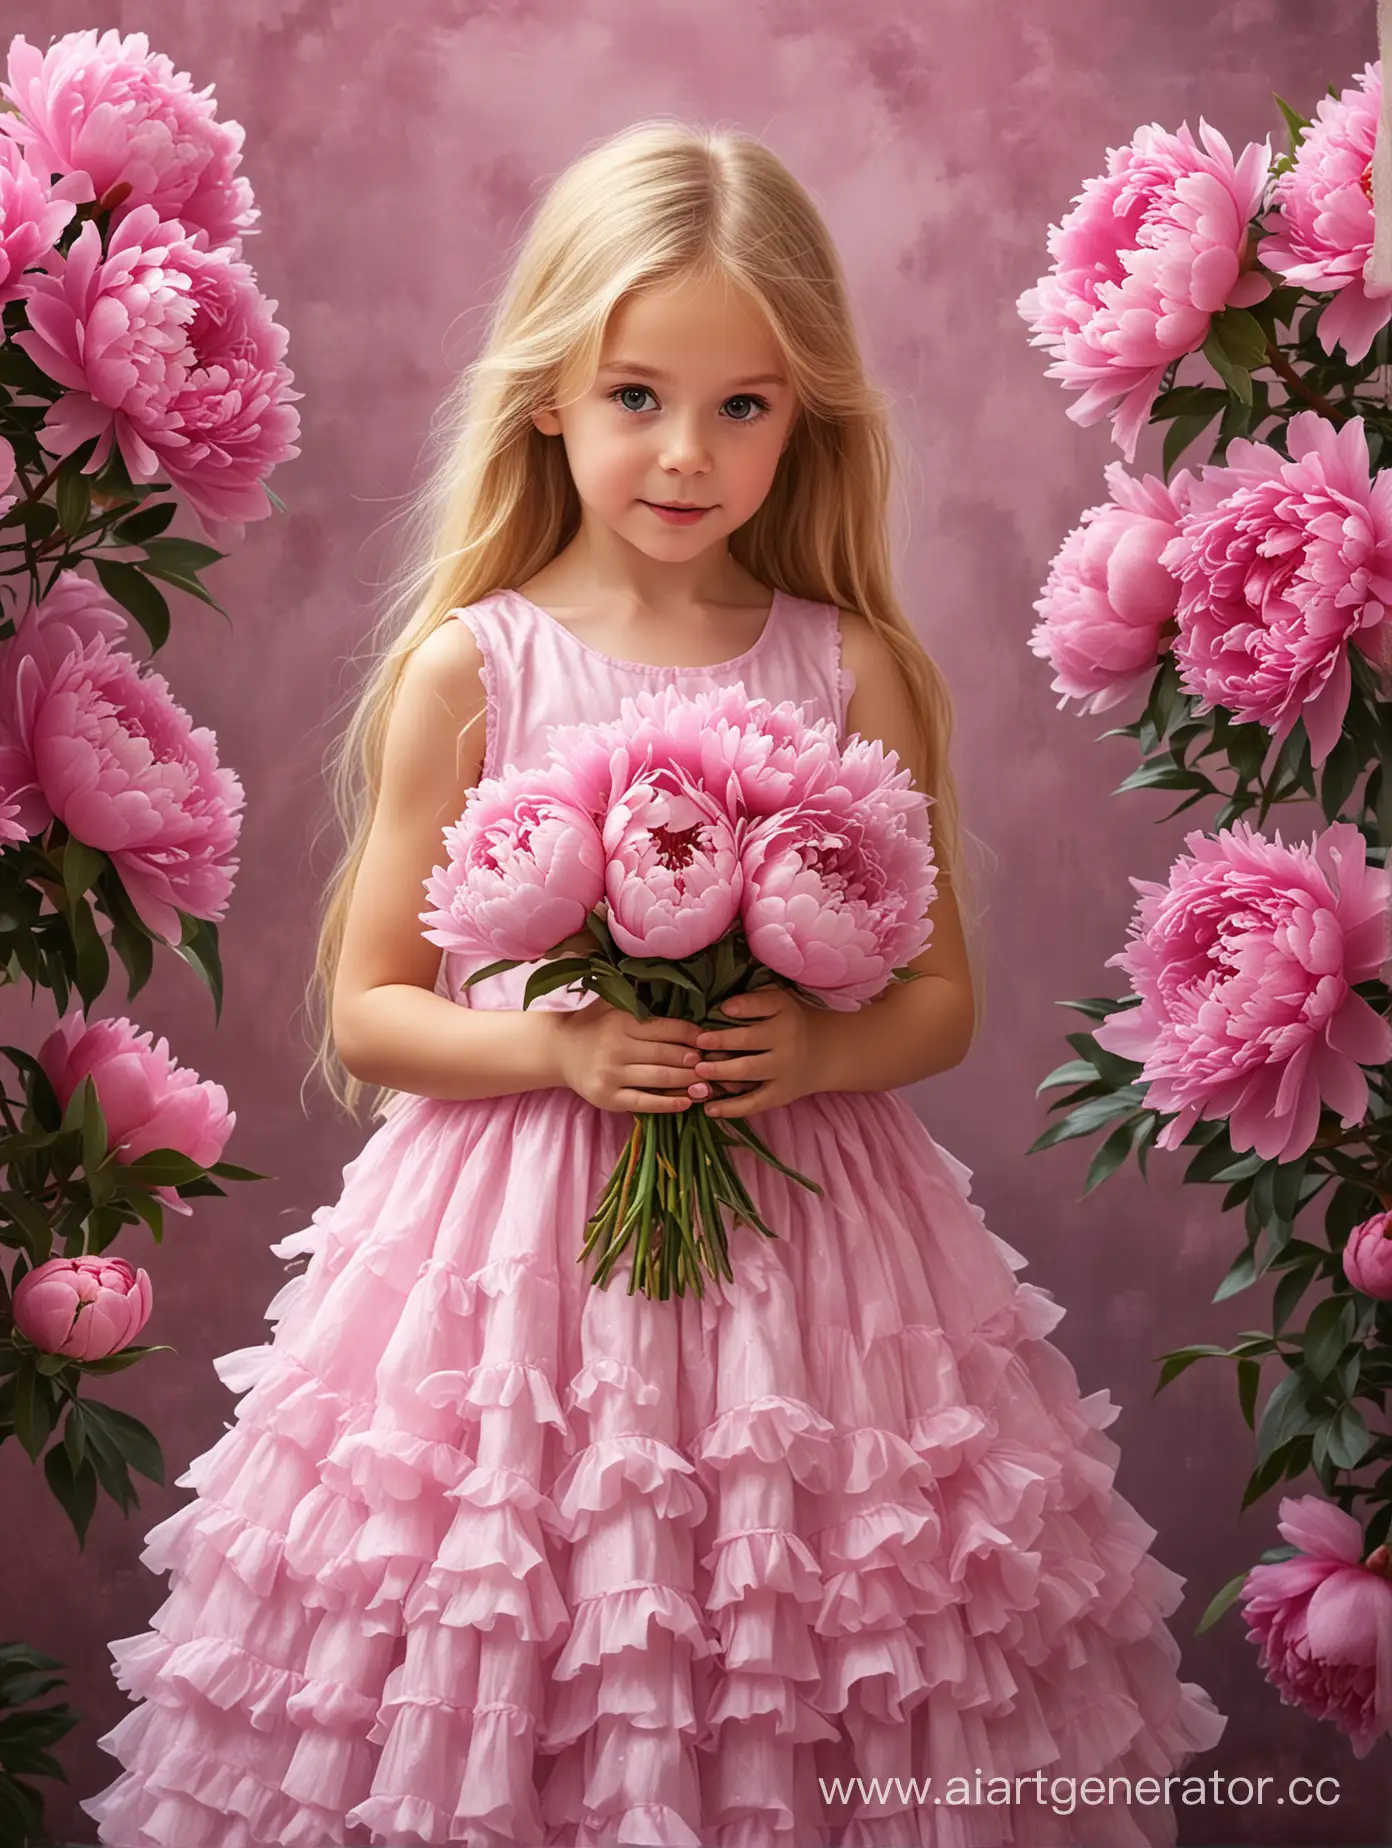 a little girl with a bouquet of flowers in her hands, peonies, long blonde hair, pink fluffy dress, picture, ,digital art, very, extremely beautiful, amazing contrasting background with peonies